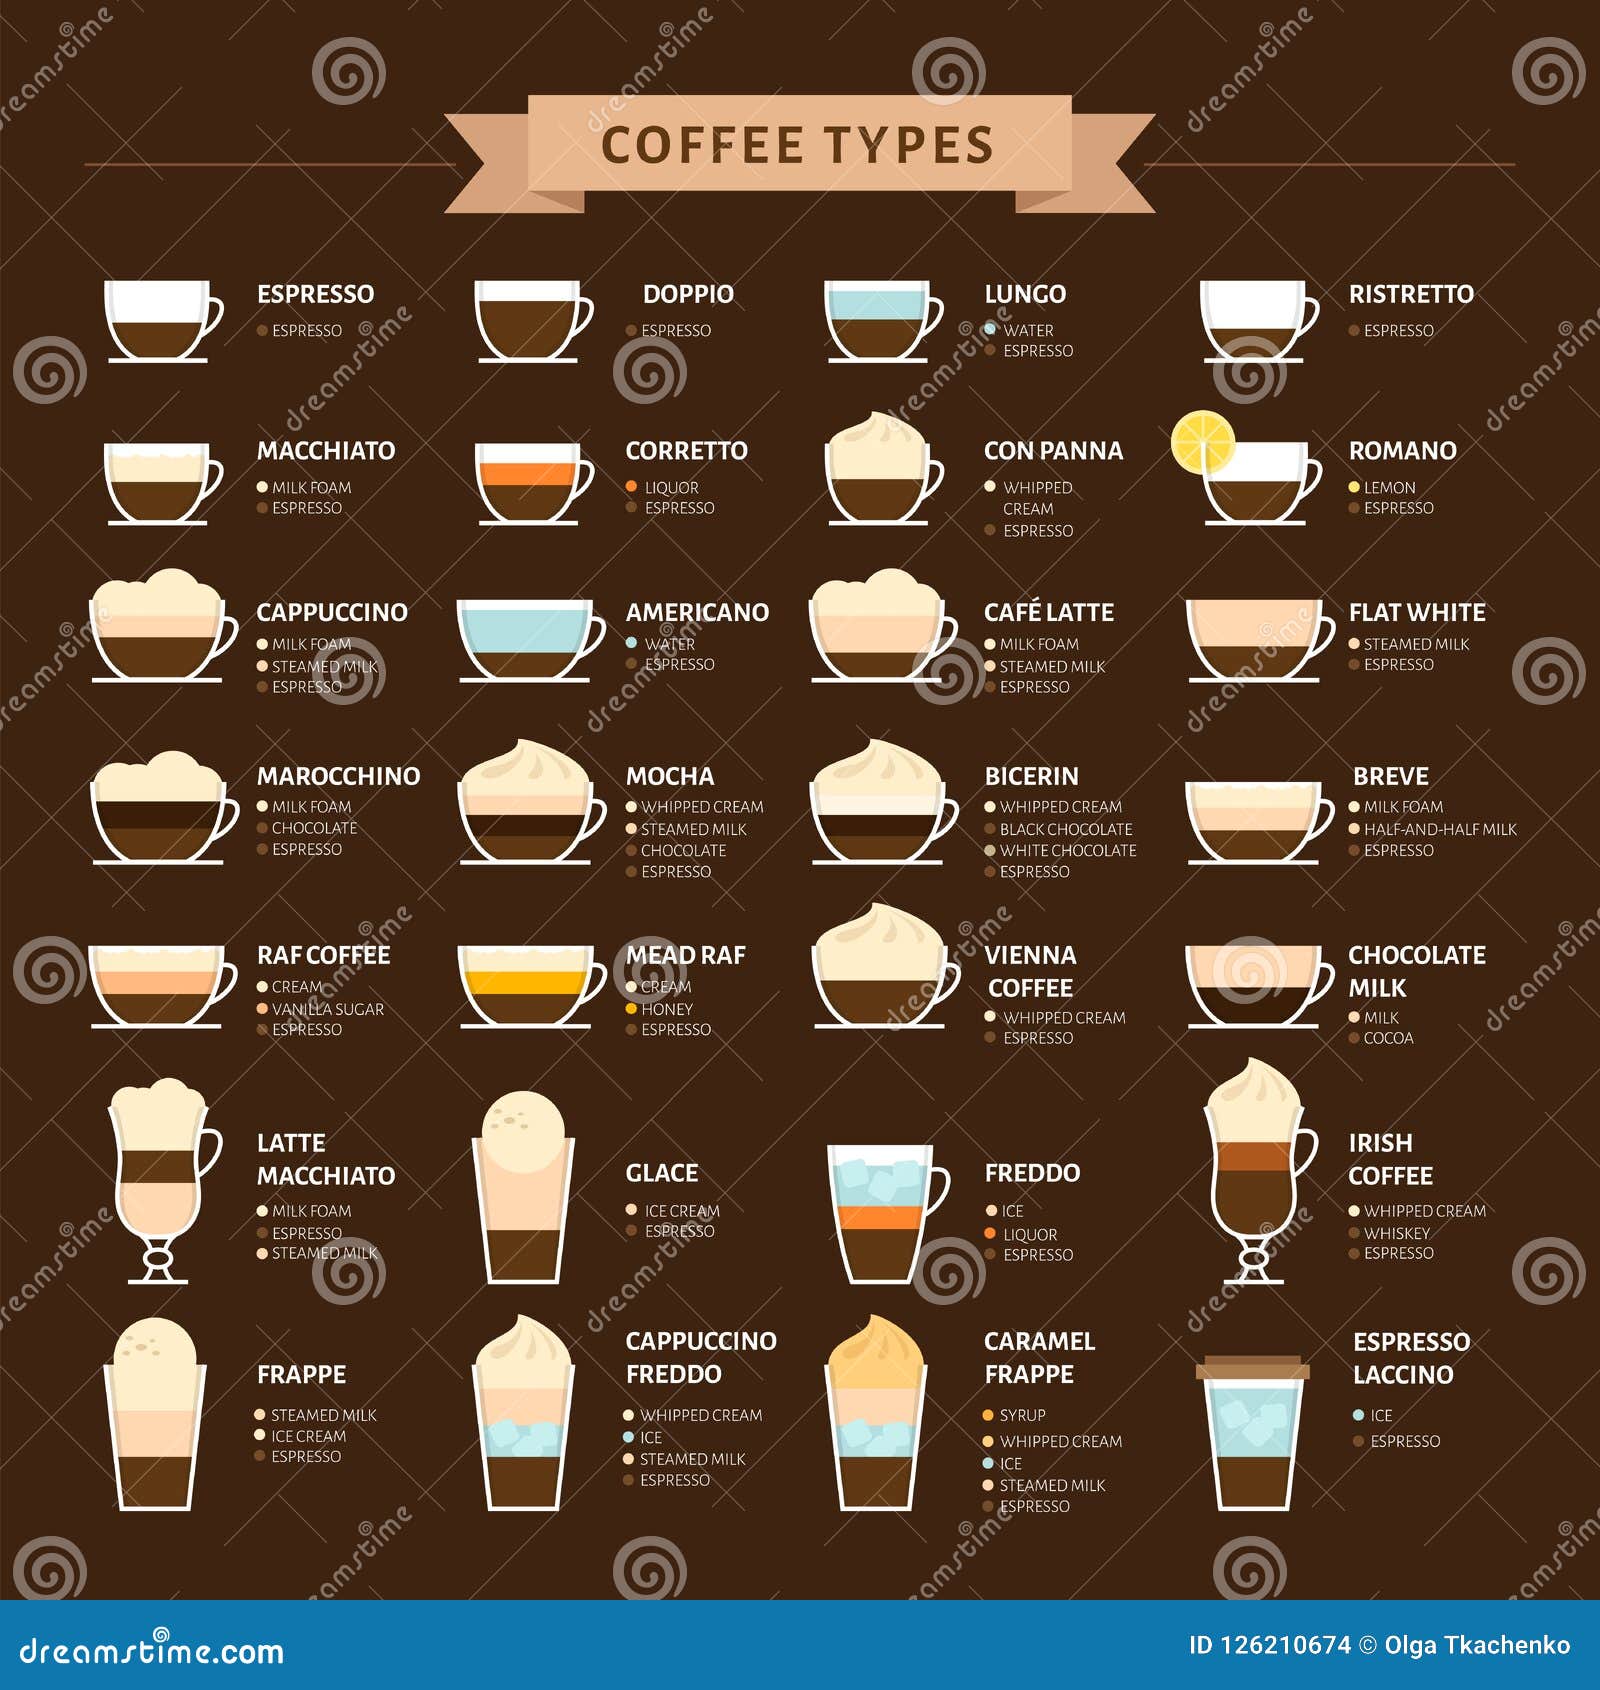 Photo 7 Types of Coffee Drinks from Various Regions in Indonesia in the City Padang